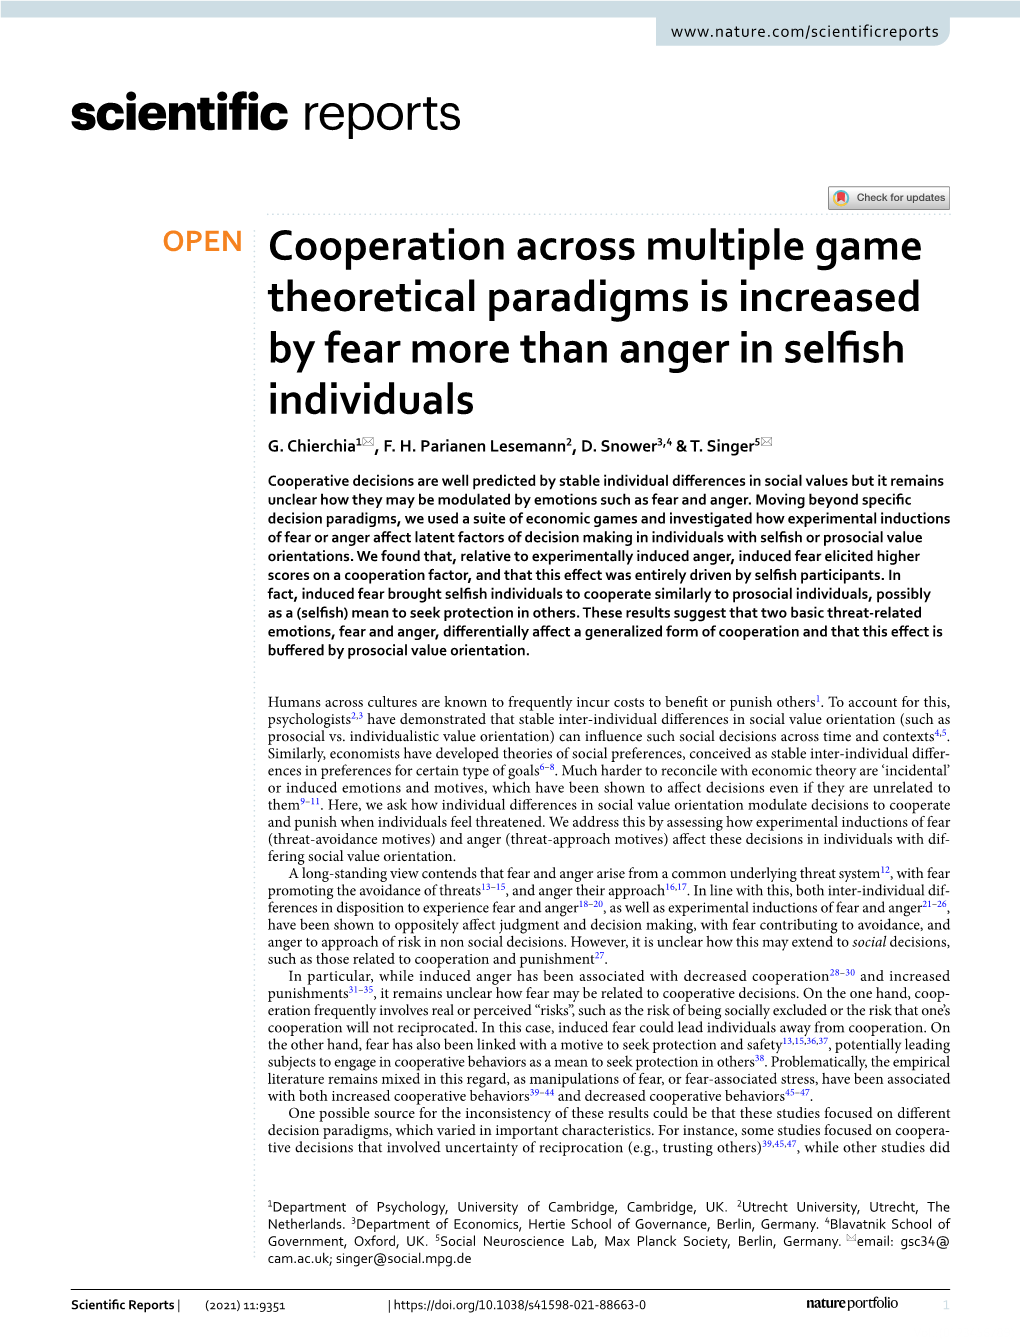 Cooperation Across Multiple Game Theoretical Paradigms Is Increased by Fear More Than Anger in Selfsh Individuals G